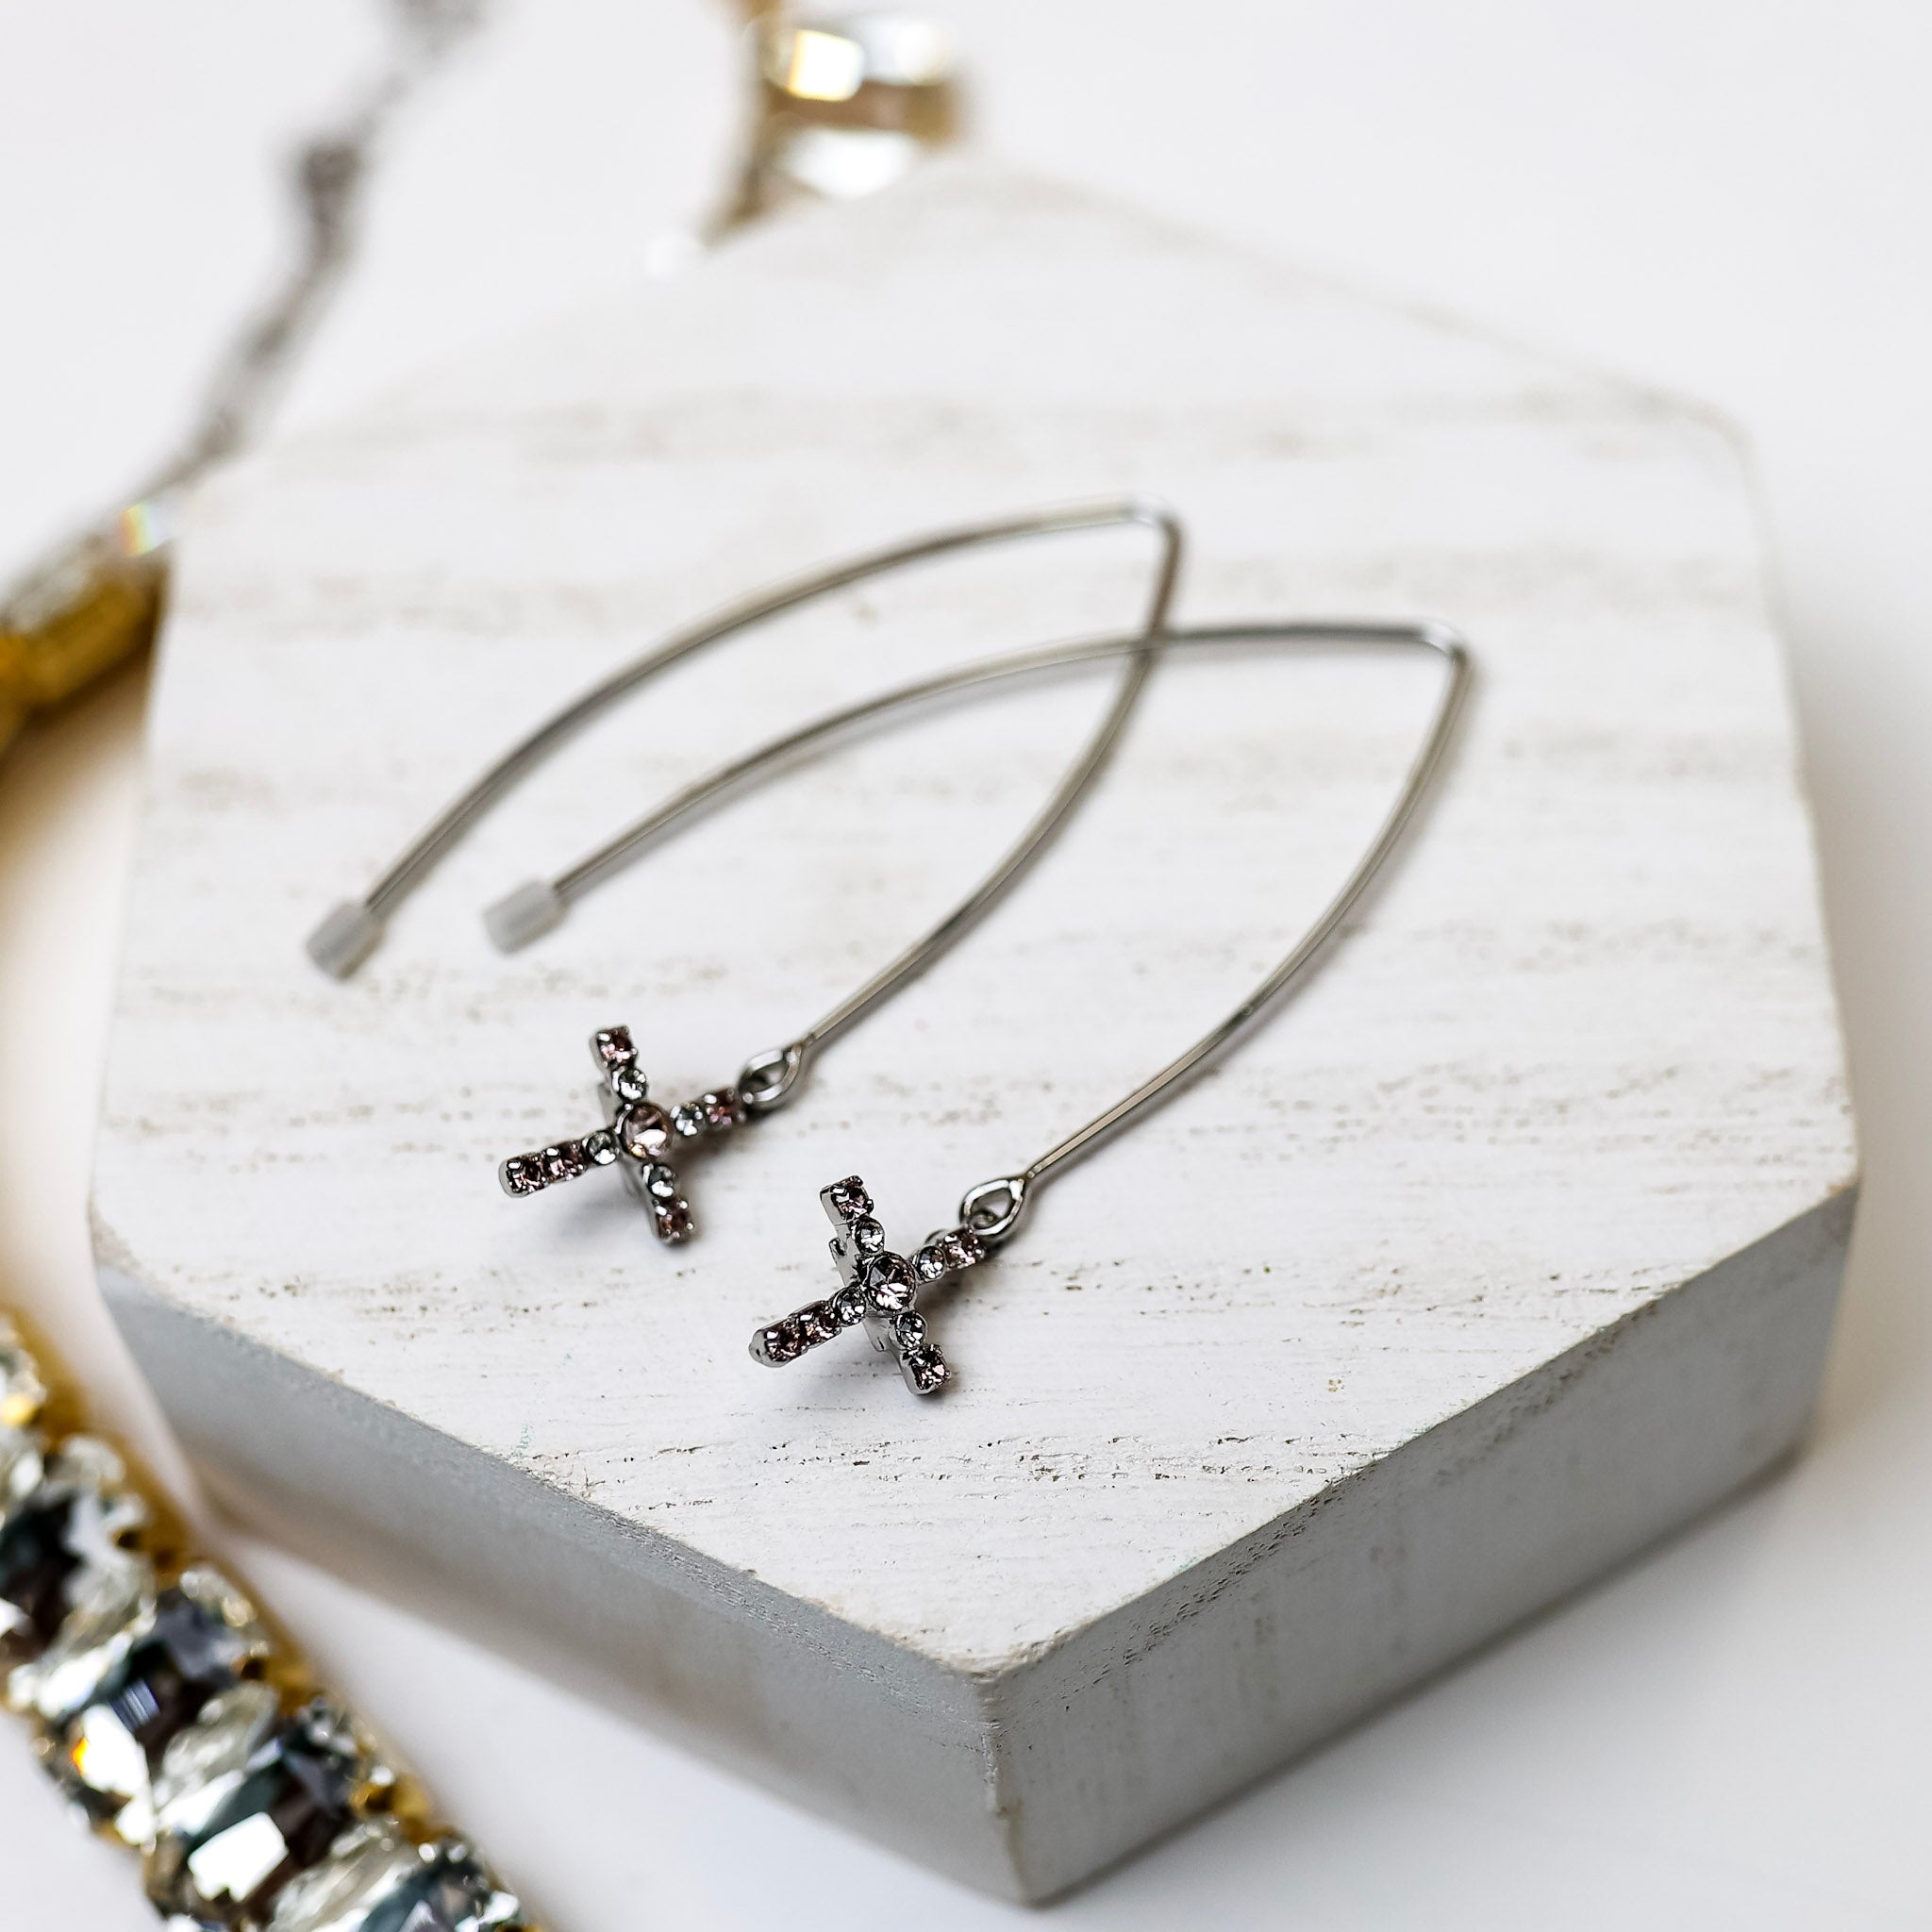 A pair of silver-tone dangle earrings with crystal Cross pendants.